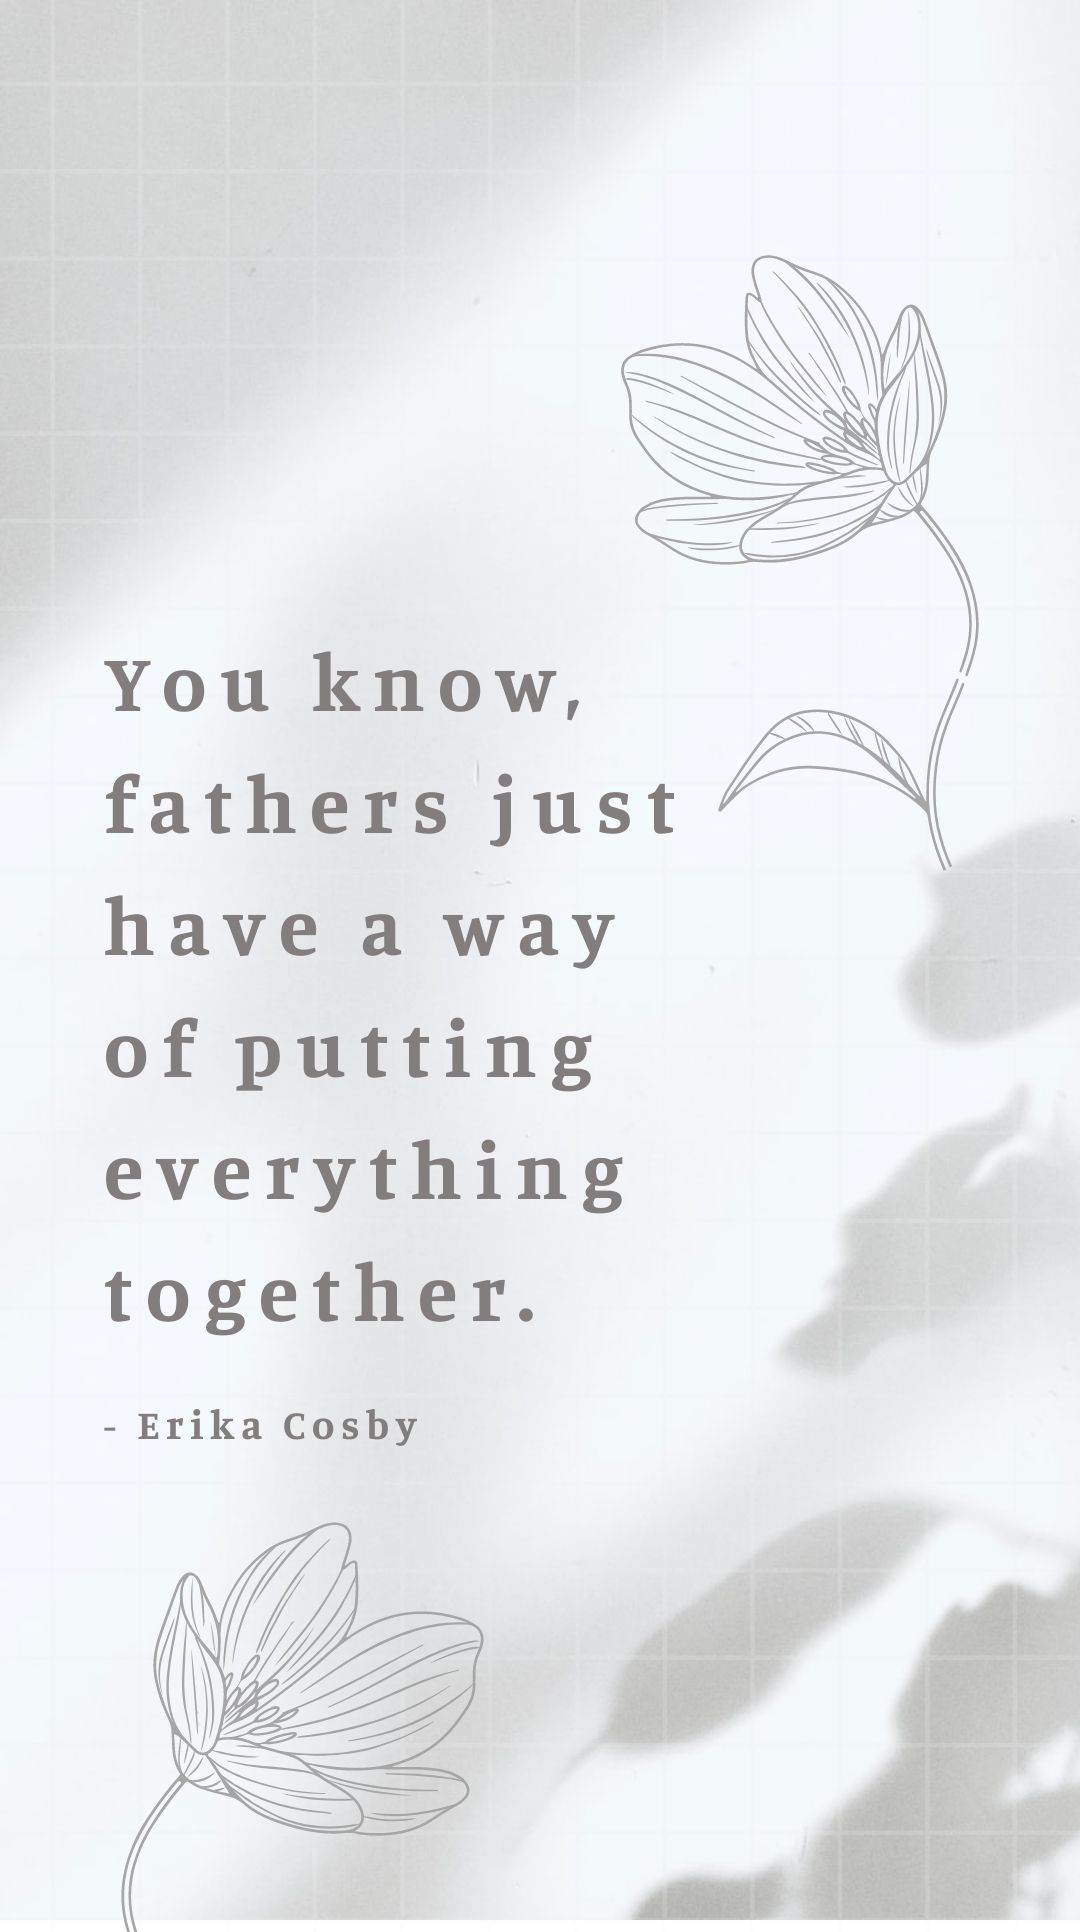 Free Erika Cosby - You know, fathers just have a way of putting everything together. in JPG